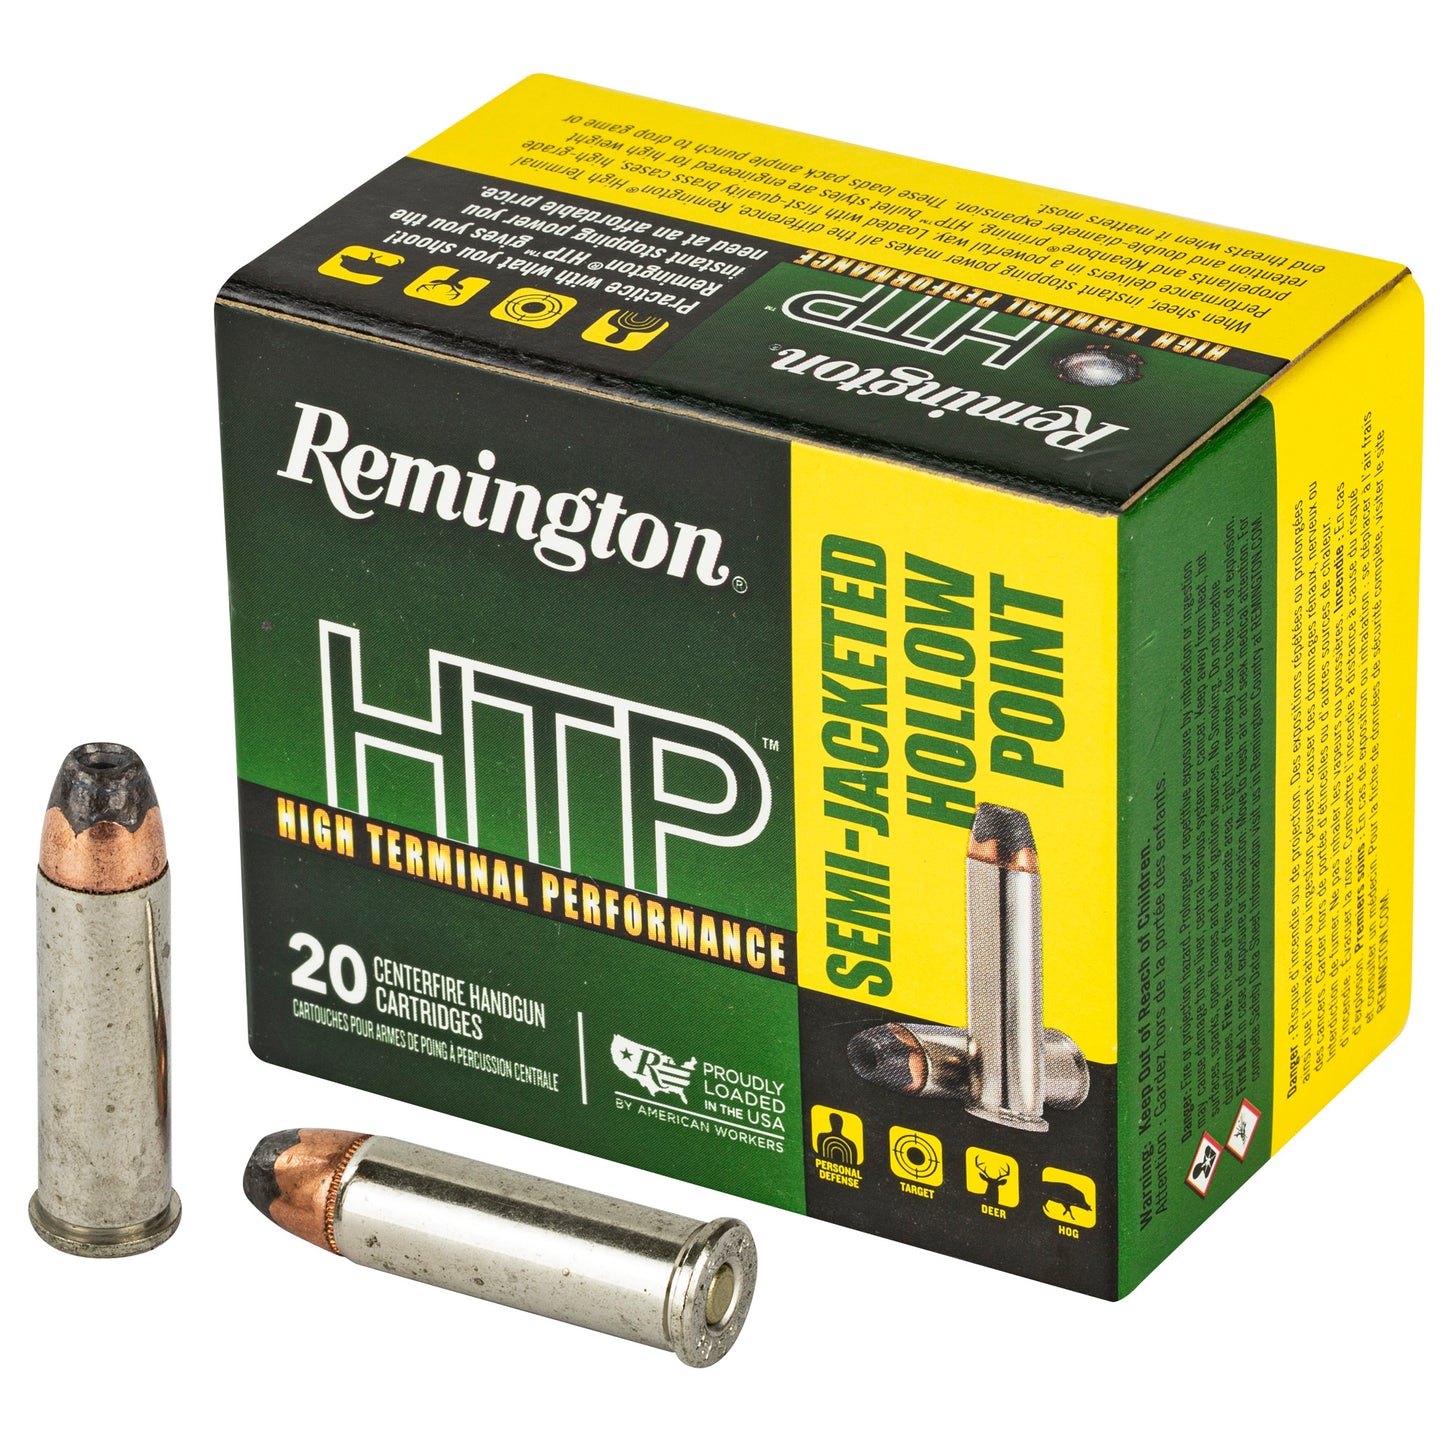 Remington, High Terminal Performance, 38 Special, 110 Grain, Semi Jacketed Hollow Point, 20 Round Box